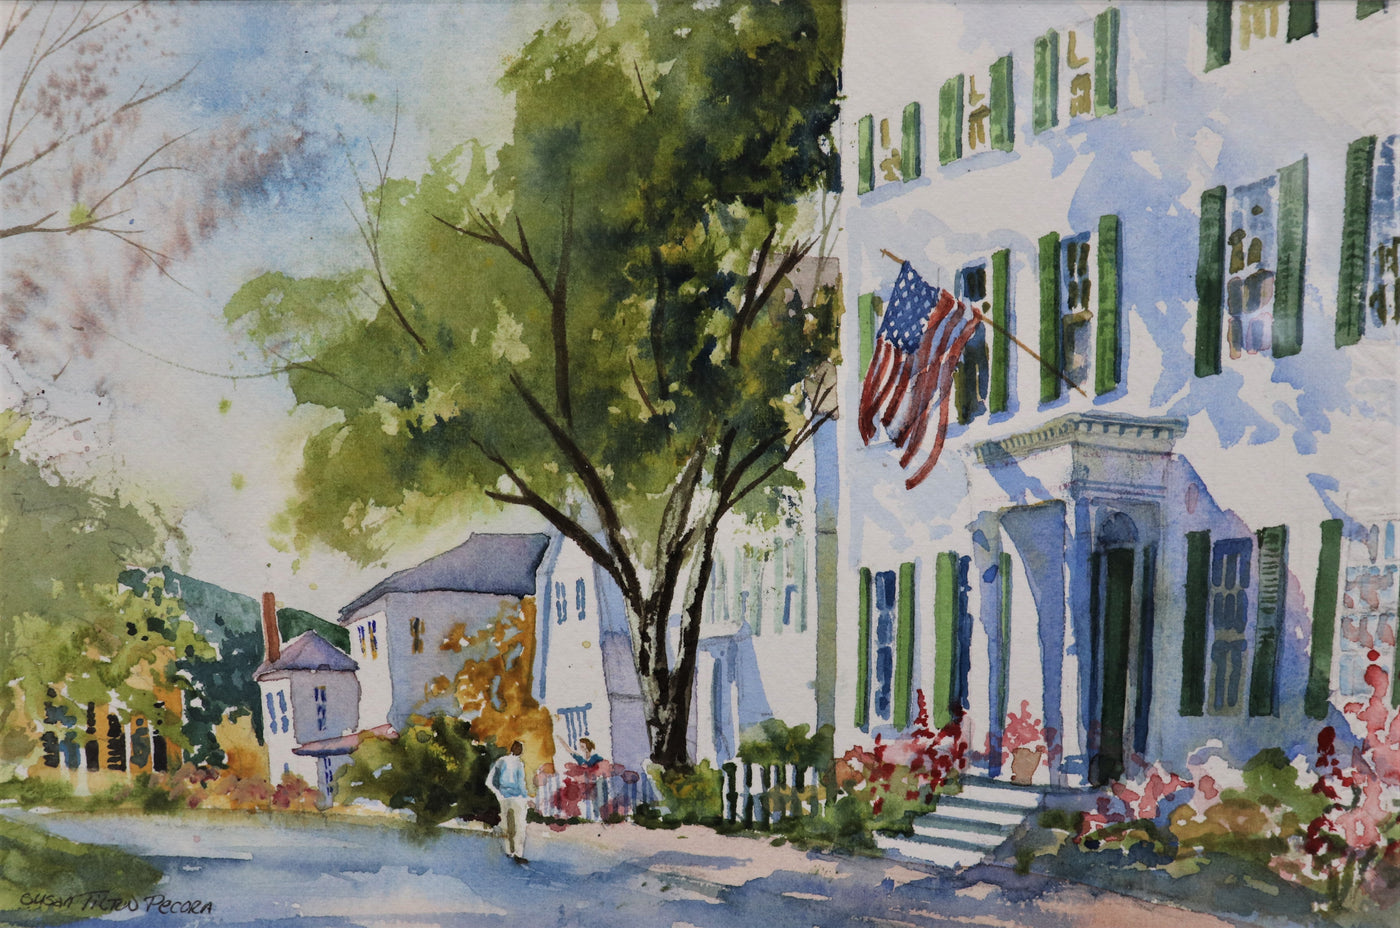 Village- Watercolor Painting Signed by Artist